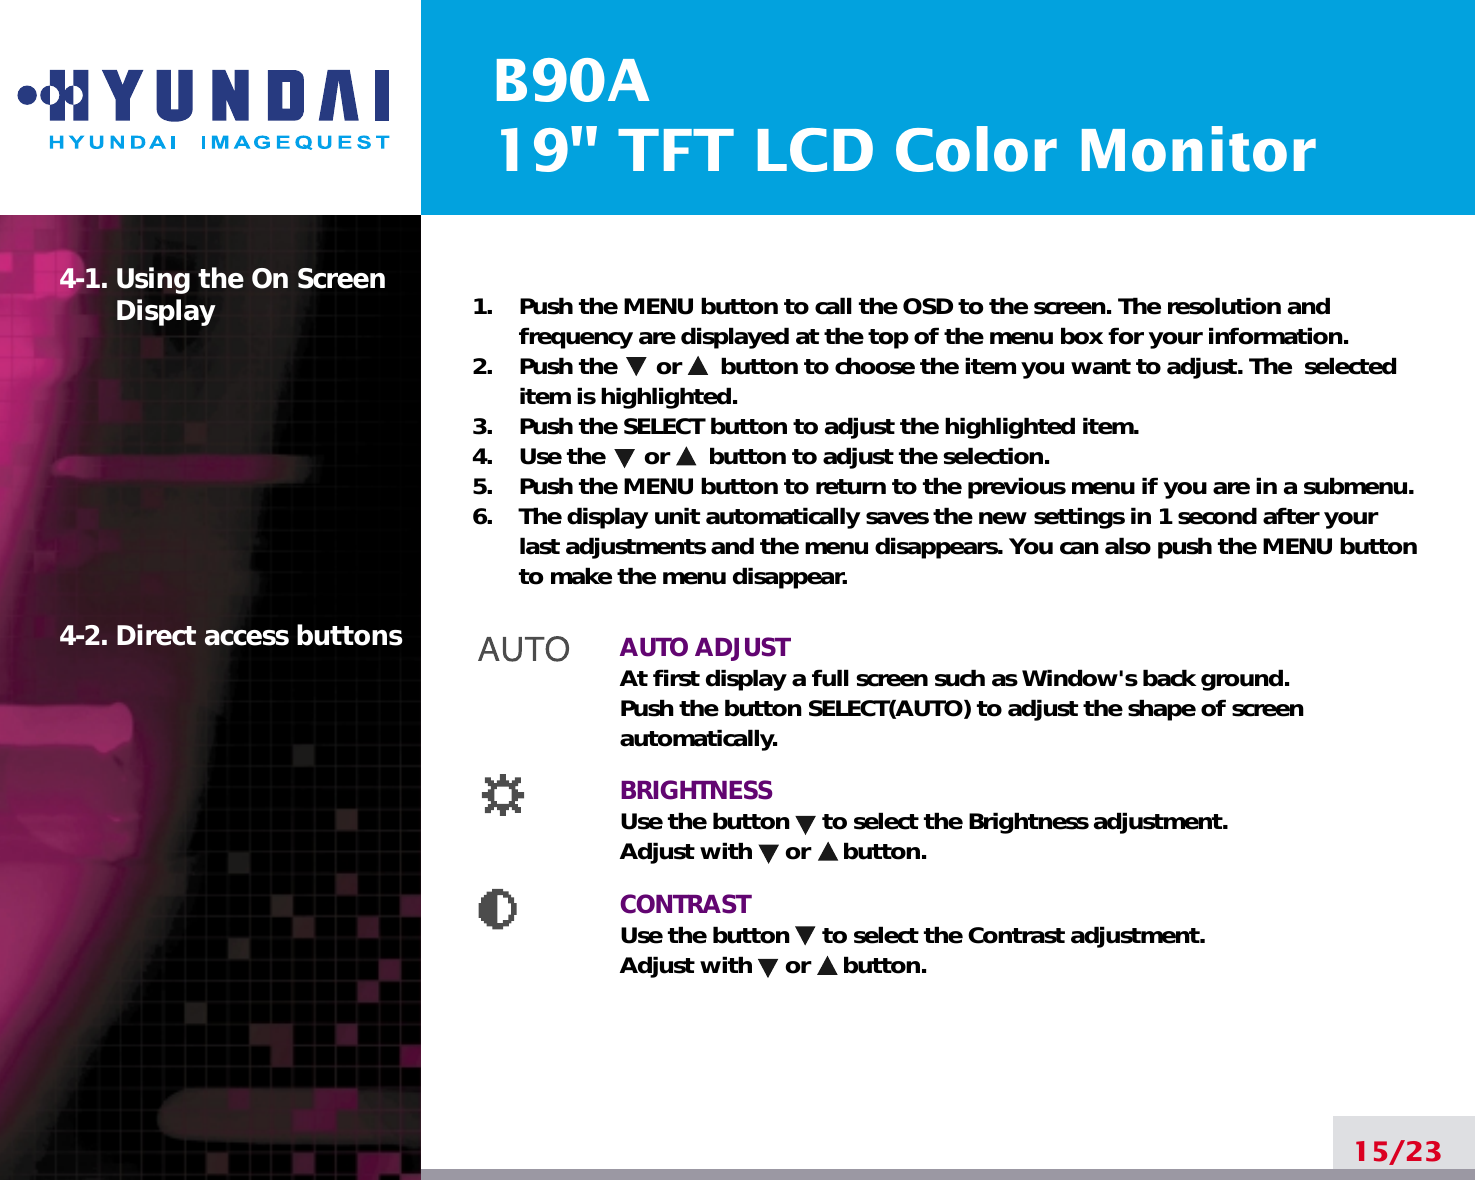 B90A19&quot; TFT LCD Color Monitor15/231.    Push the MENU button to call the OSD to the screen. The resolution andfrequency are displayed at the top of the menu box for your information.2.    Push the      or      button to choose the item you want to adjust. The  selecteditem is highlighted.3.    Push the SELECT button to adjust the highlighted item. 4.    Use the      or      button to adjust the selection.5.    Push the MENU button to return to the previous menu if you are in a submenu.6.    The display unit automatically saves the new settings in 1 second after yourlast adjustments and the menu disappears. You can also push the MENU buttonto make the menu disappear.AUTO ADJUSTAt first display a full screen such as Window&apos;s back ground.Push the button SELECT(AUTO) to adjust the shape of screenautomatically.BRIGHTNESSUse the button     to select the Brightness adjustment.Adjust with     or     button.CONTRASTUse the button     to select the Contrast adjustment.Adjust with     or     button.4-1. Using the On ScreenDisplay 4-2. Direct access buttons